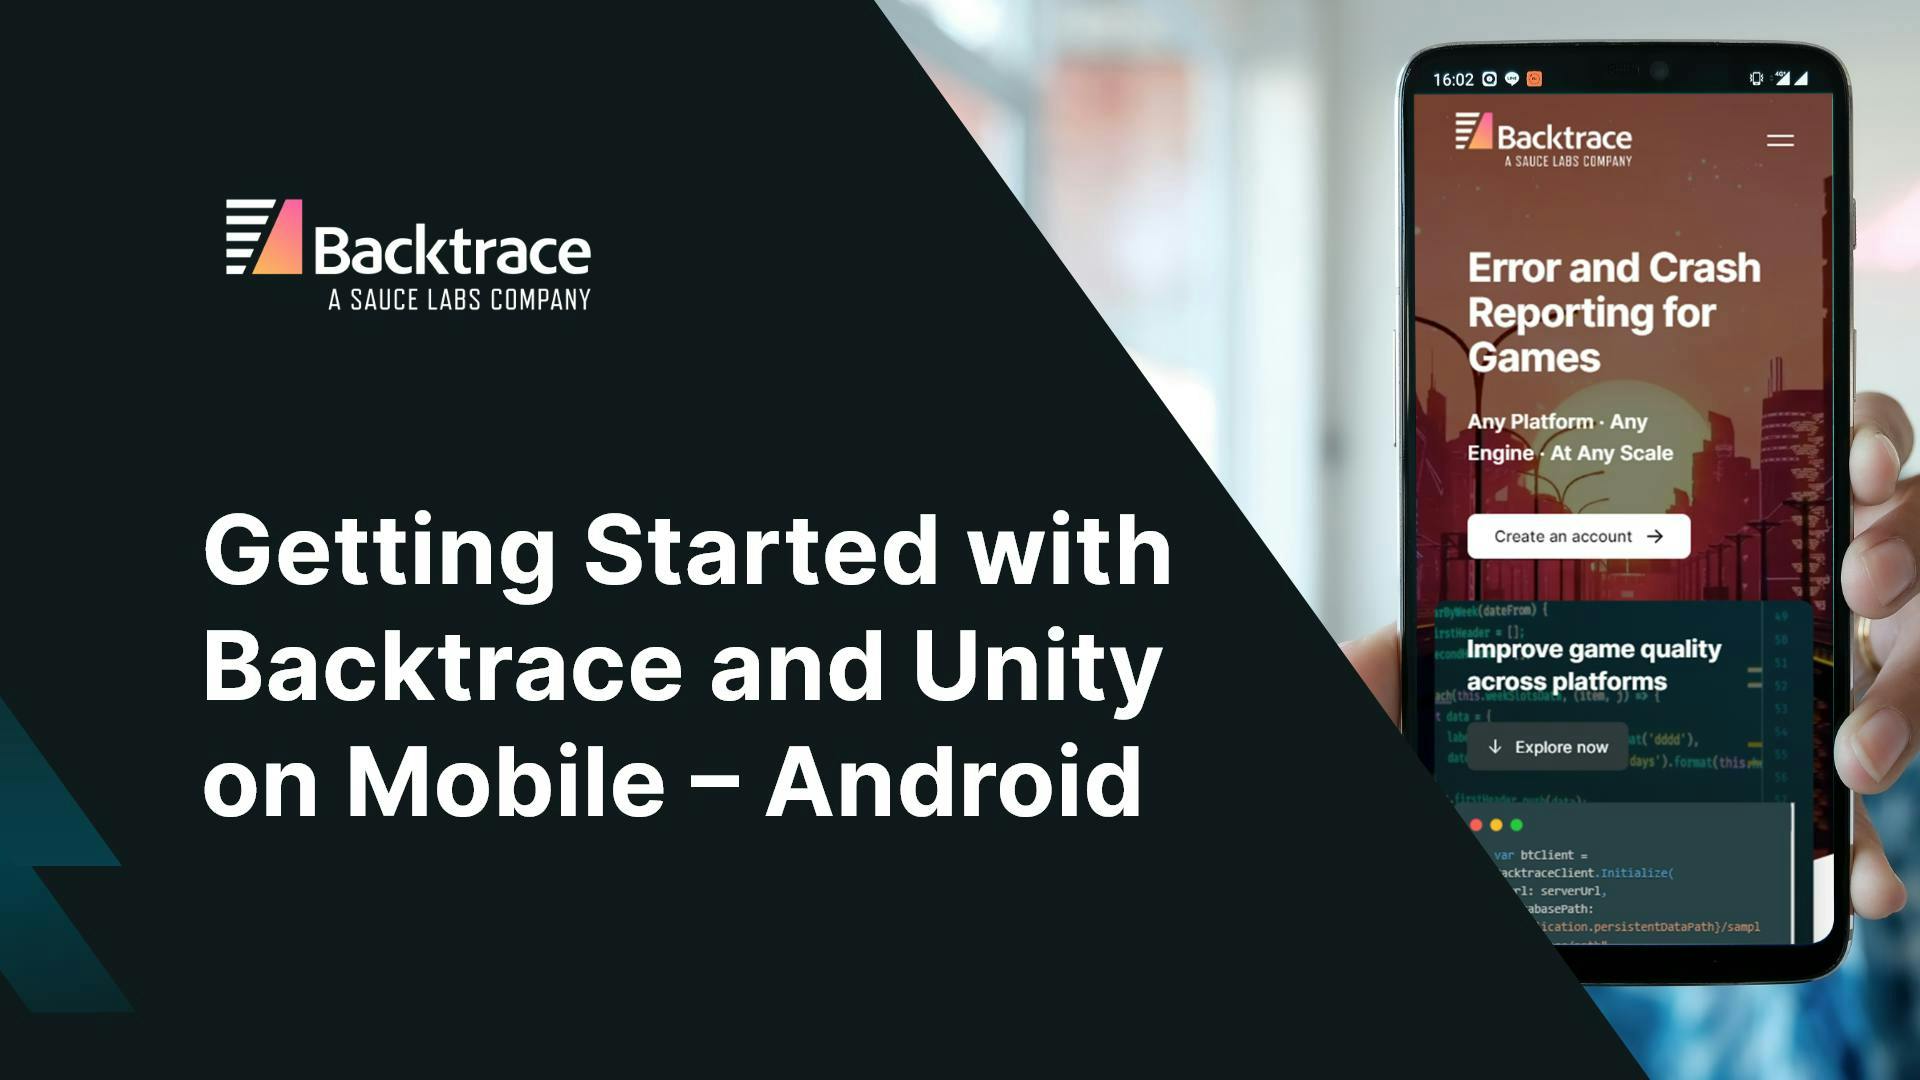 Getting Started with Backtrace and Unity on Mobile (Android)